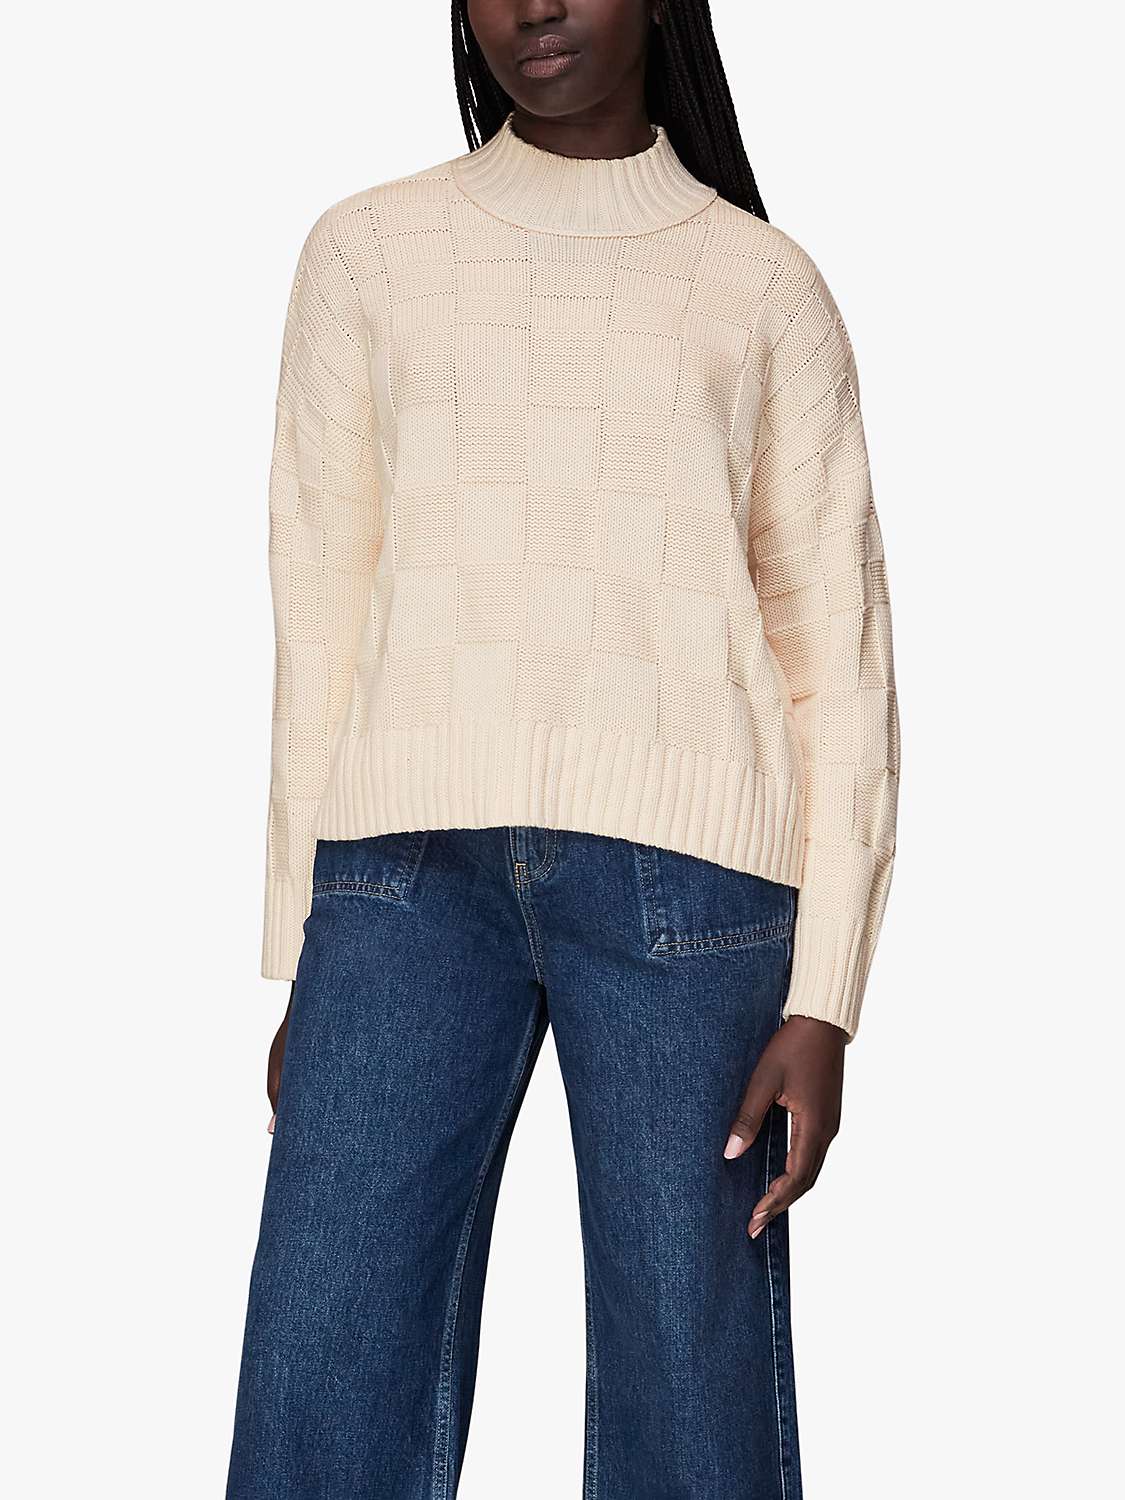 Buy Whistles Texture Check Knitted Cotton Jumper Online at johnlewis.com